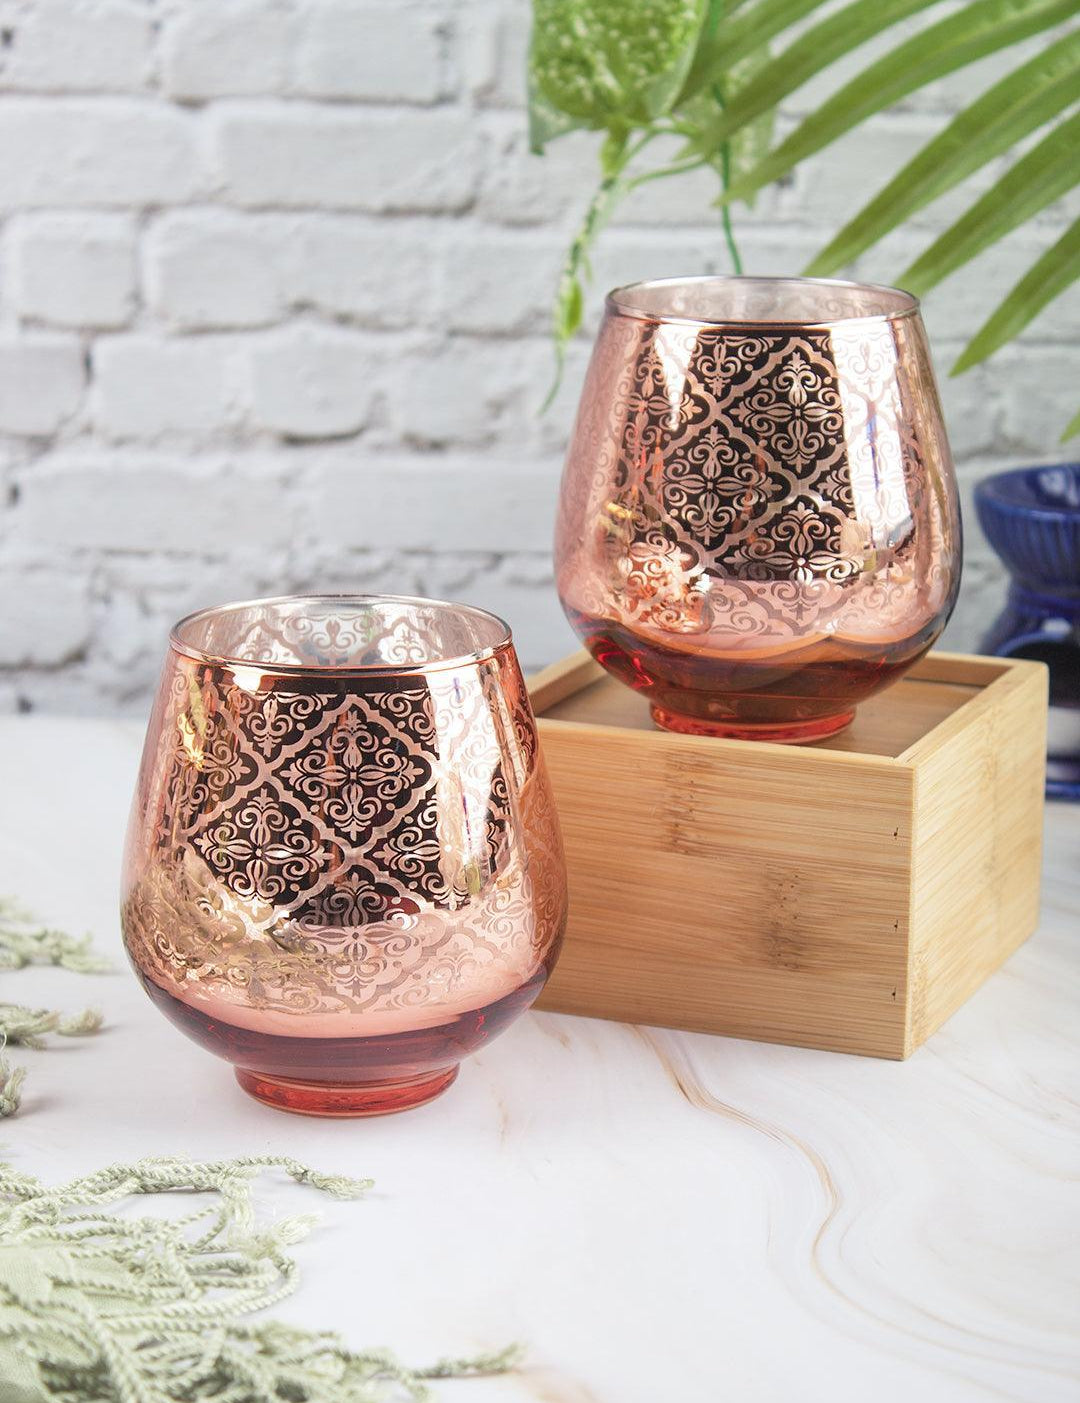 Decorative Tealight Candle Holders Pack Of 2 Pcs - MARKET 99